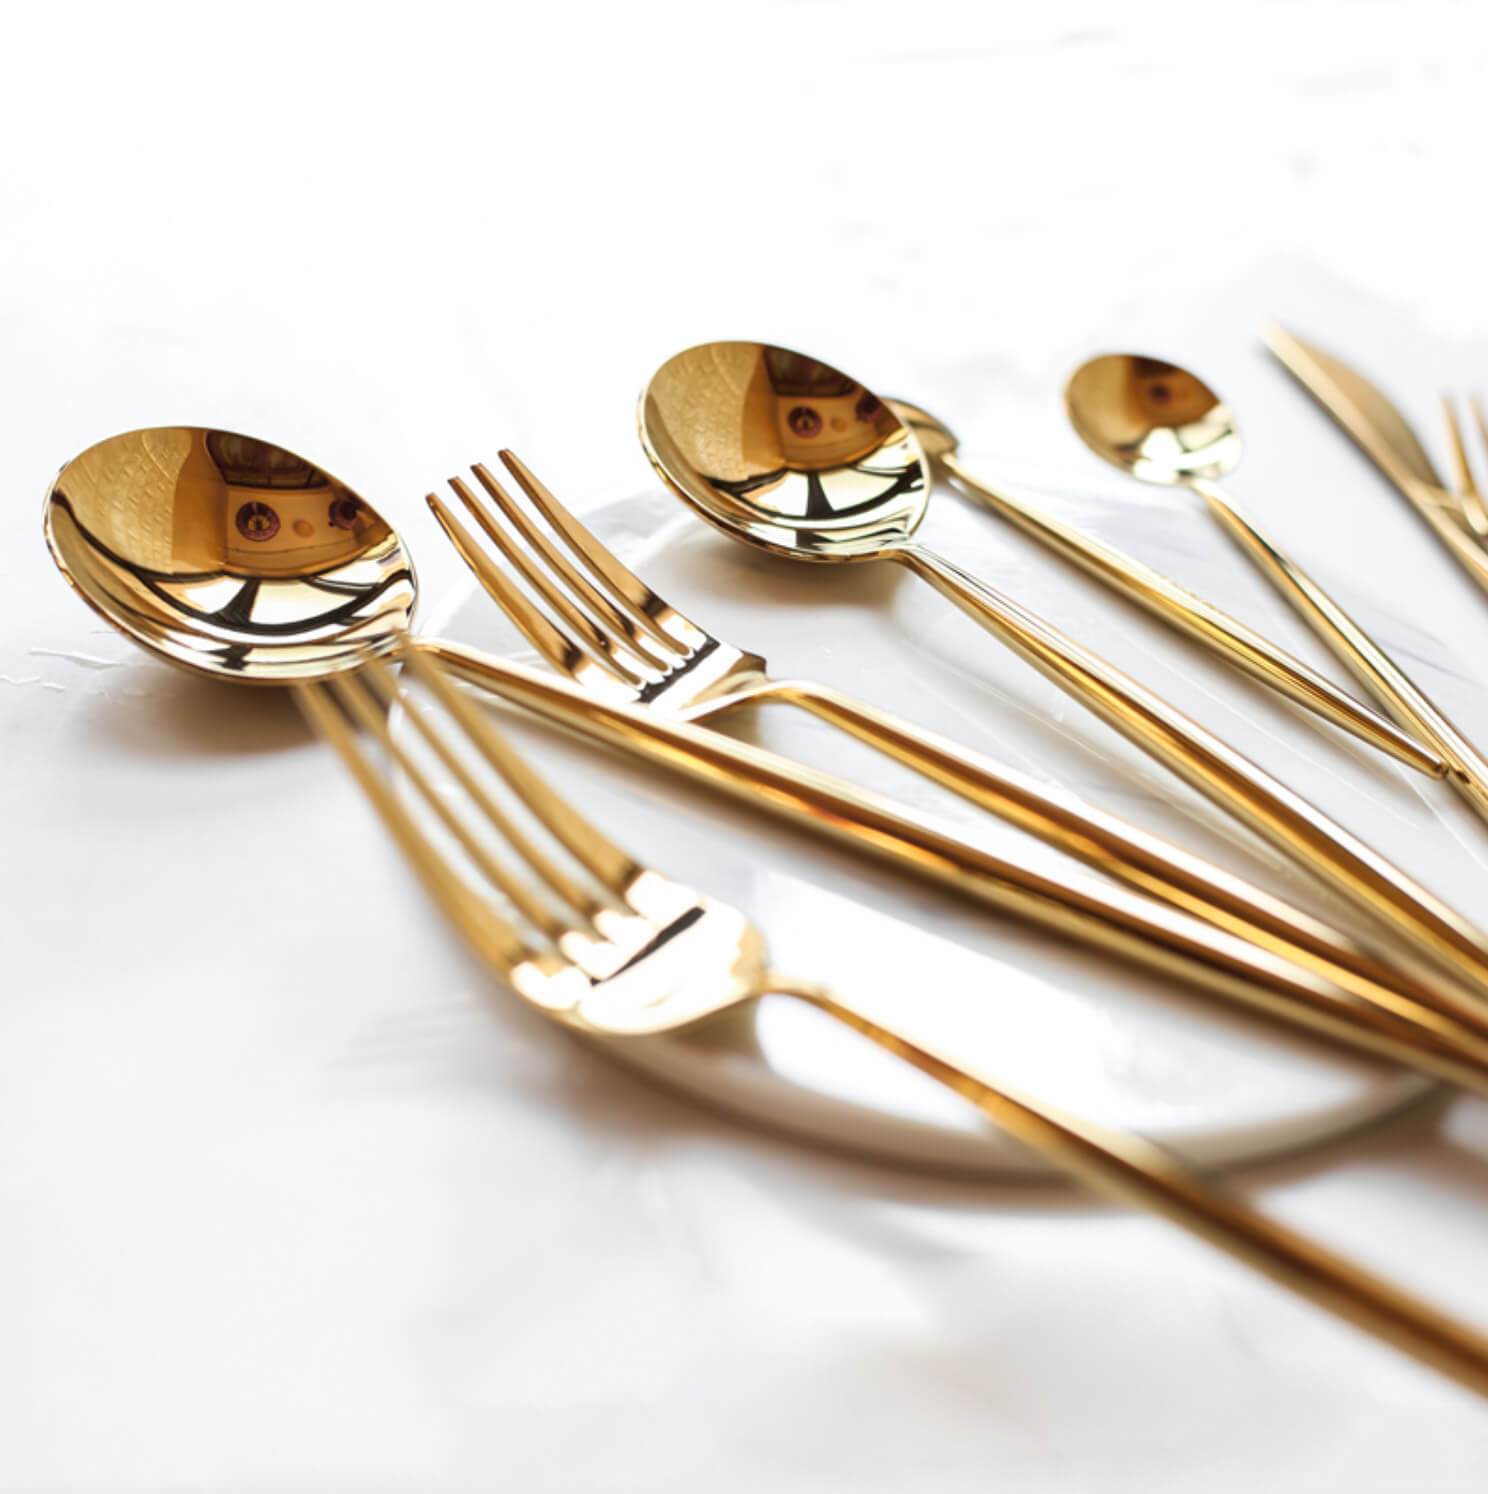 4 Pcs Mirror Surface Gold Cutlery Set - Nordic Side - 